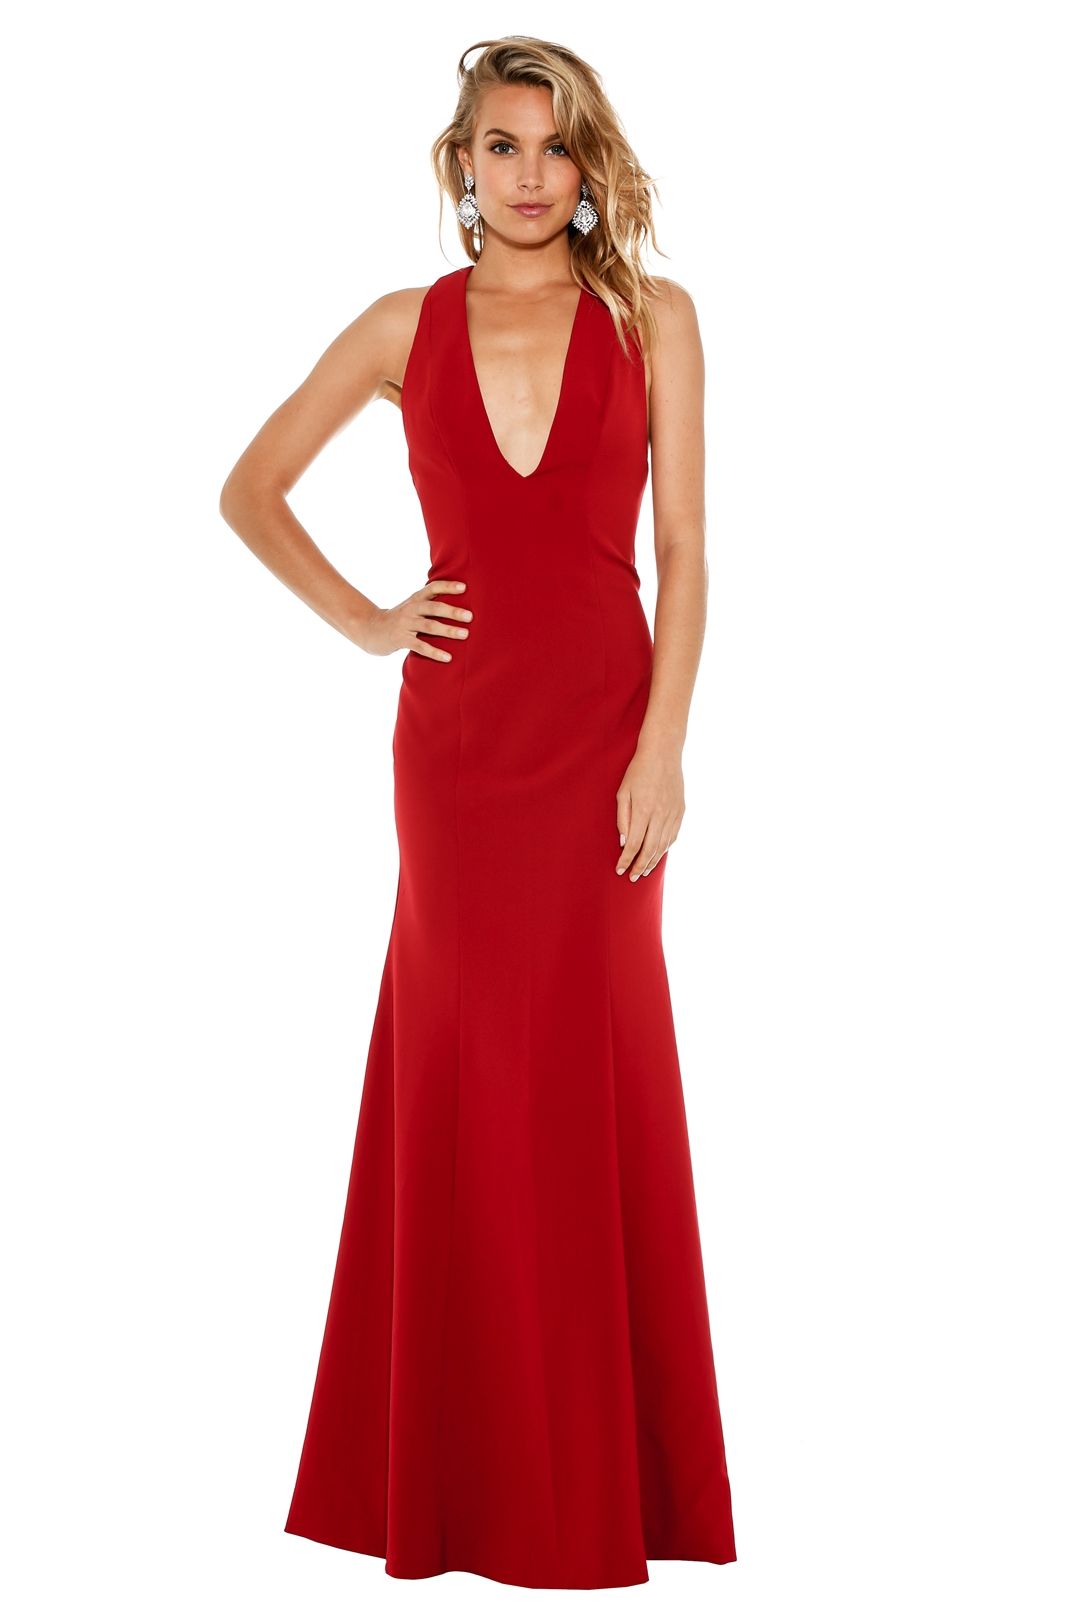 Fame & Partners - Pavo Dress - Red - Front